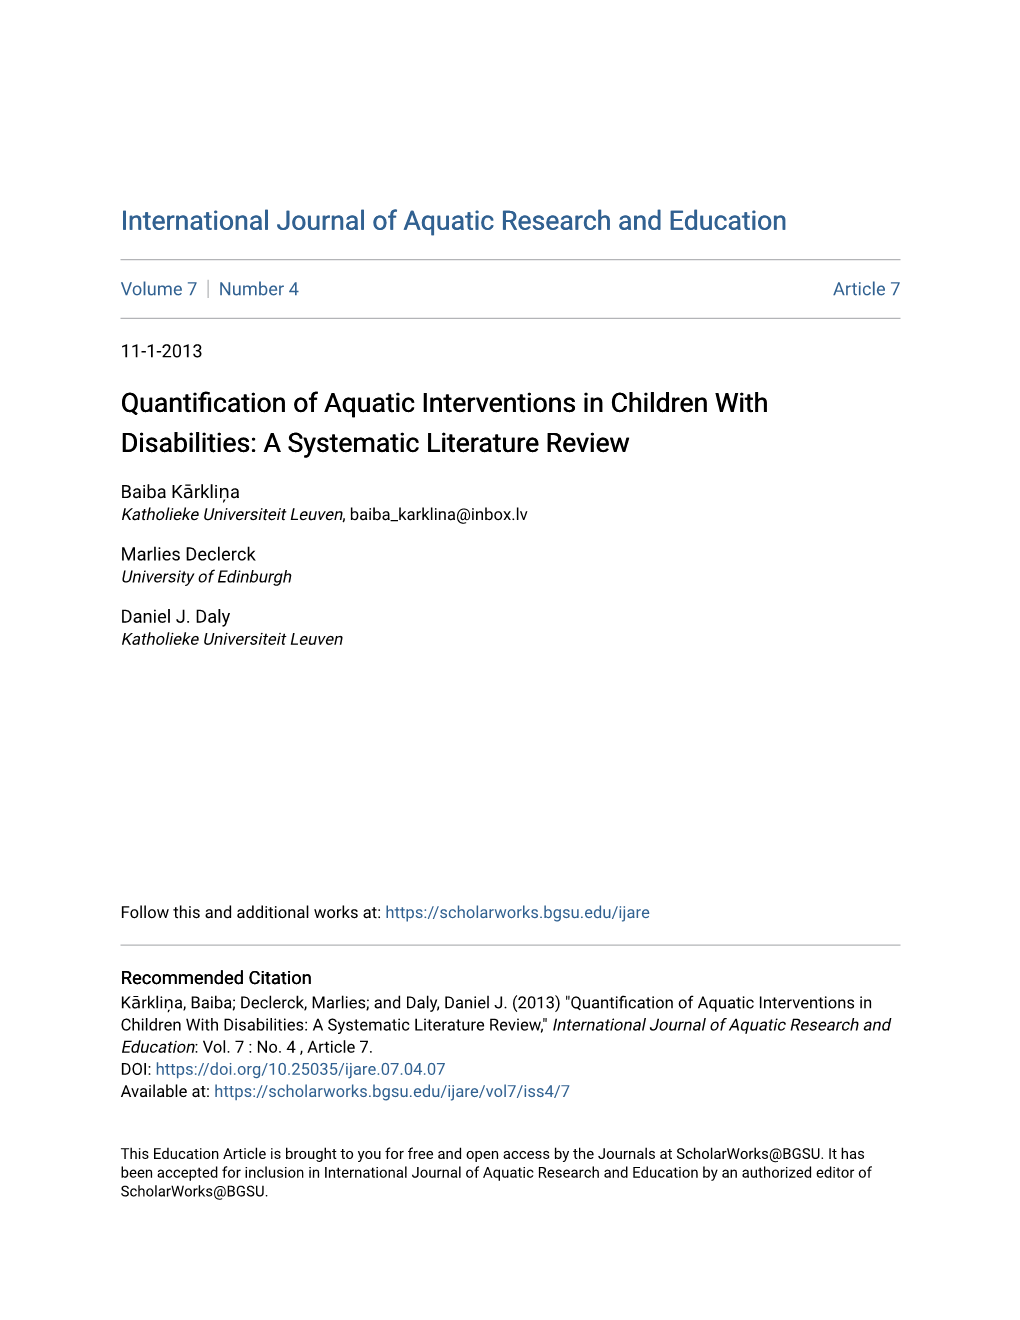 Quantification of Aquatic Interventions in Children with Disabilities: a Systematic Literature Review